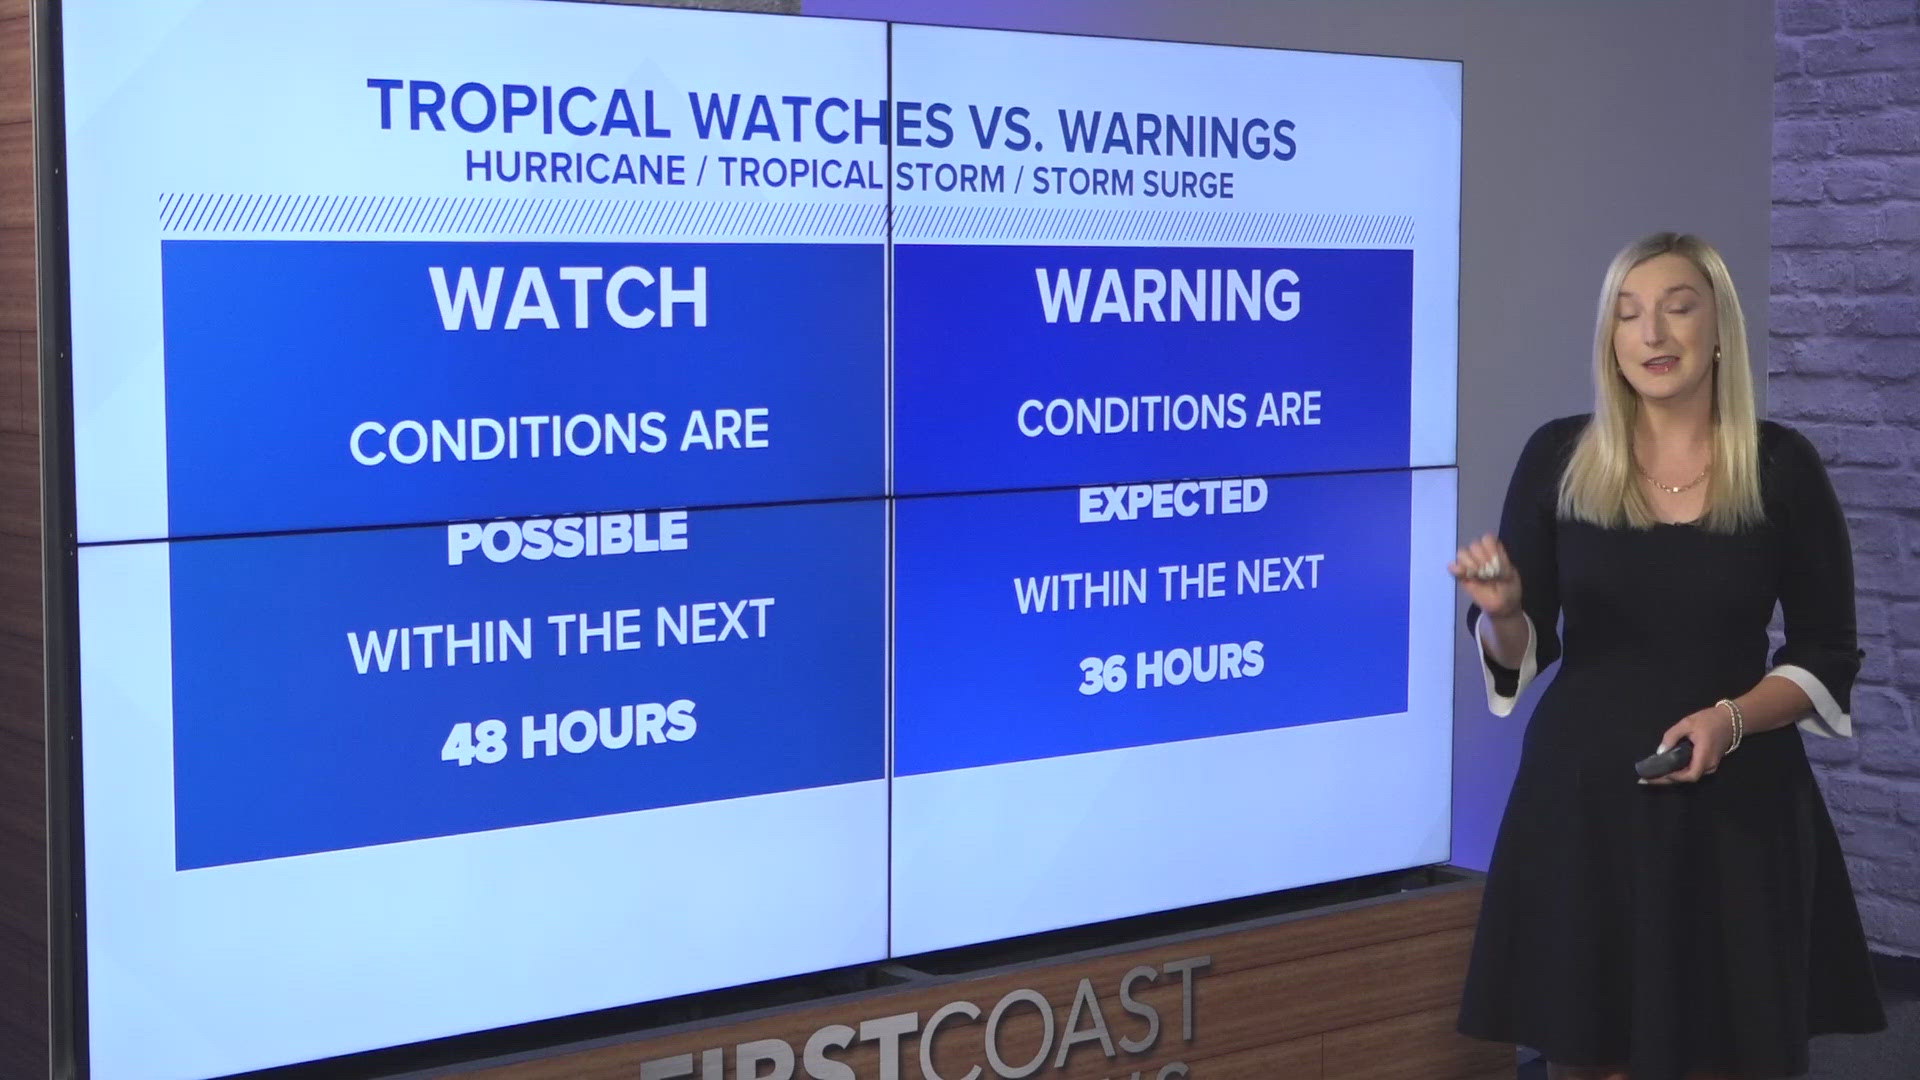 This hurricane preparedness week, we are reviewing and understanding tropical forecast information.